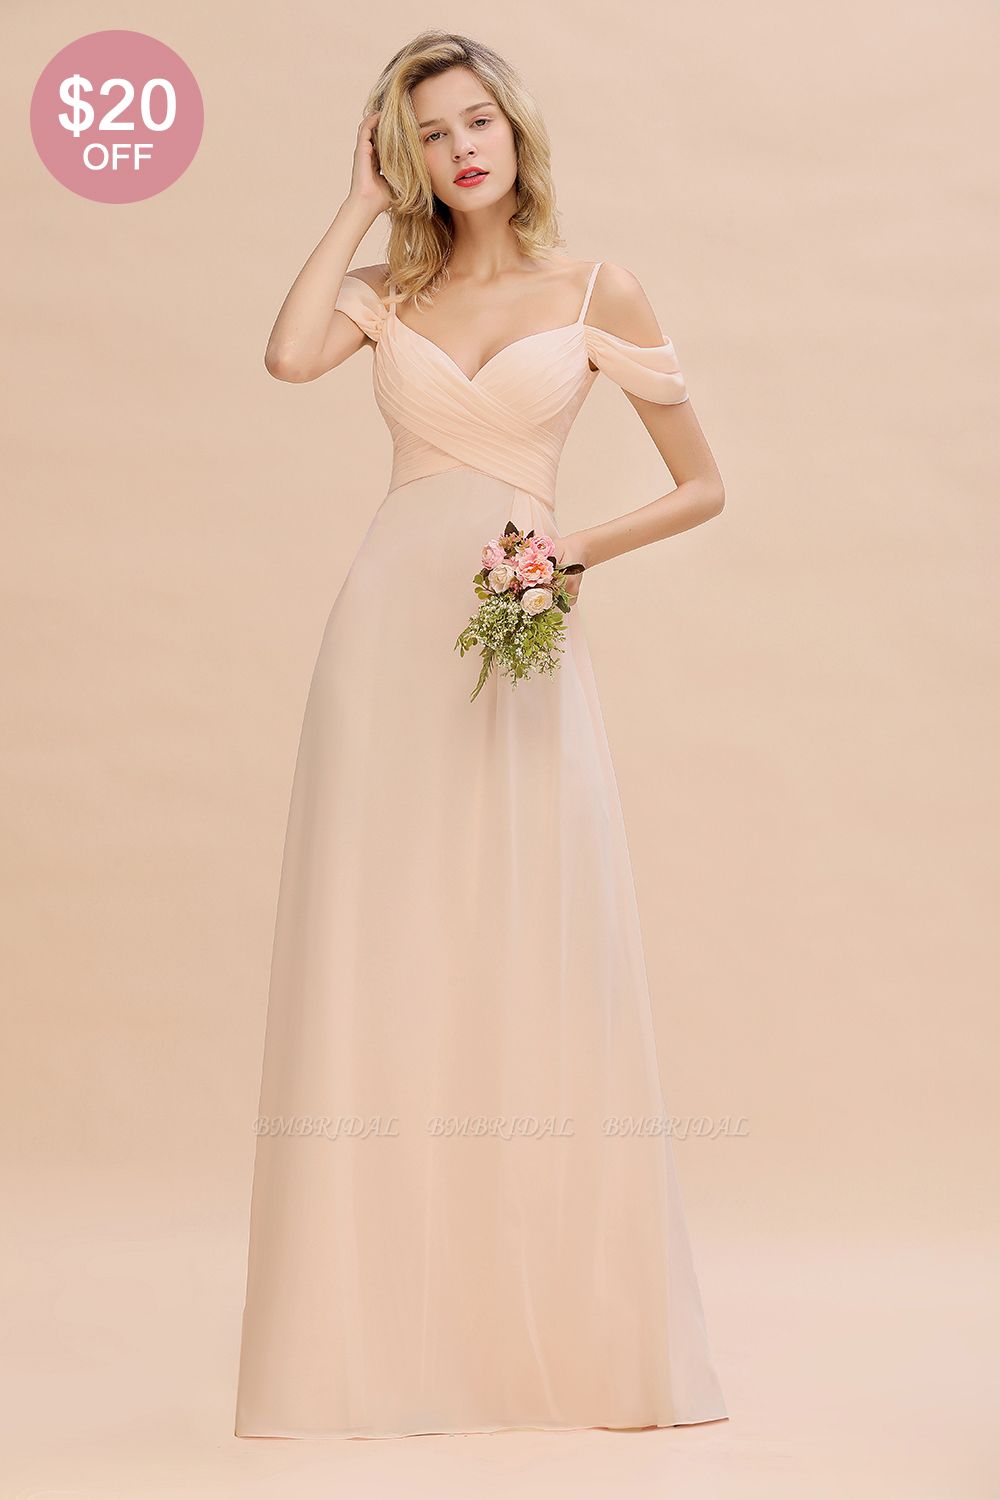 BMbridal Off-the-Shoulder Sweetheart Ruched Long Bridesmaid Dress Online